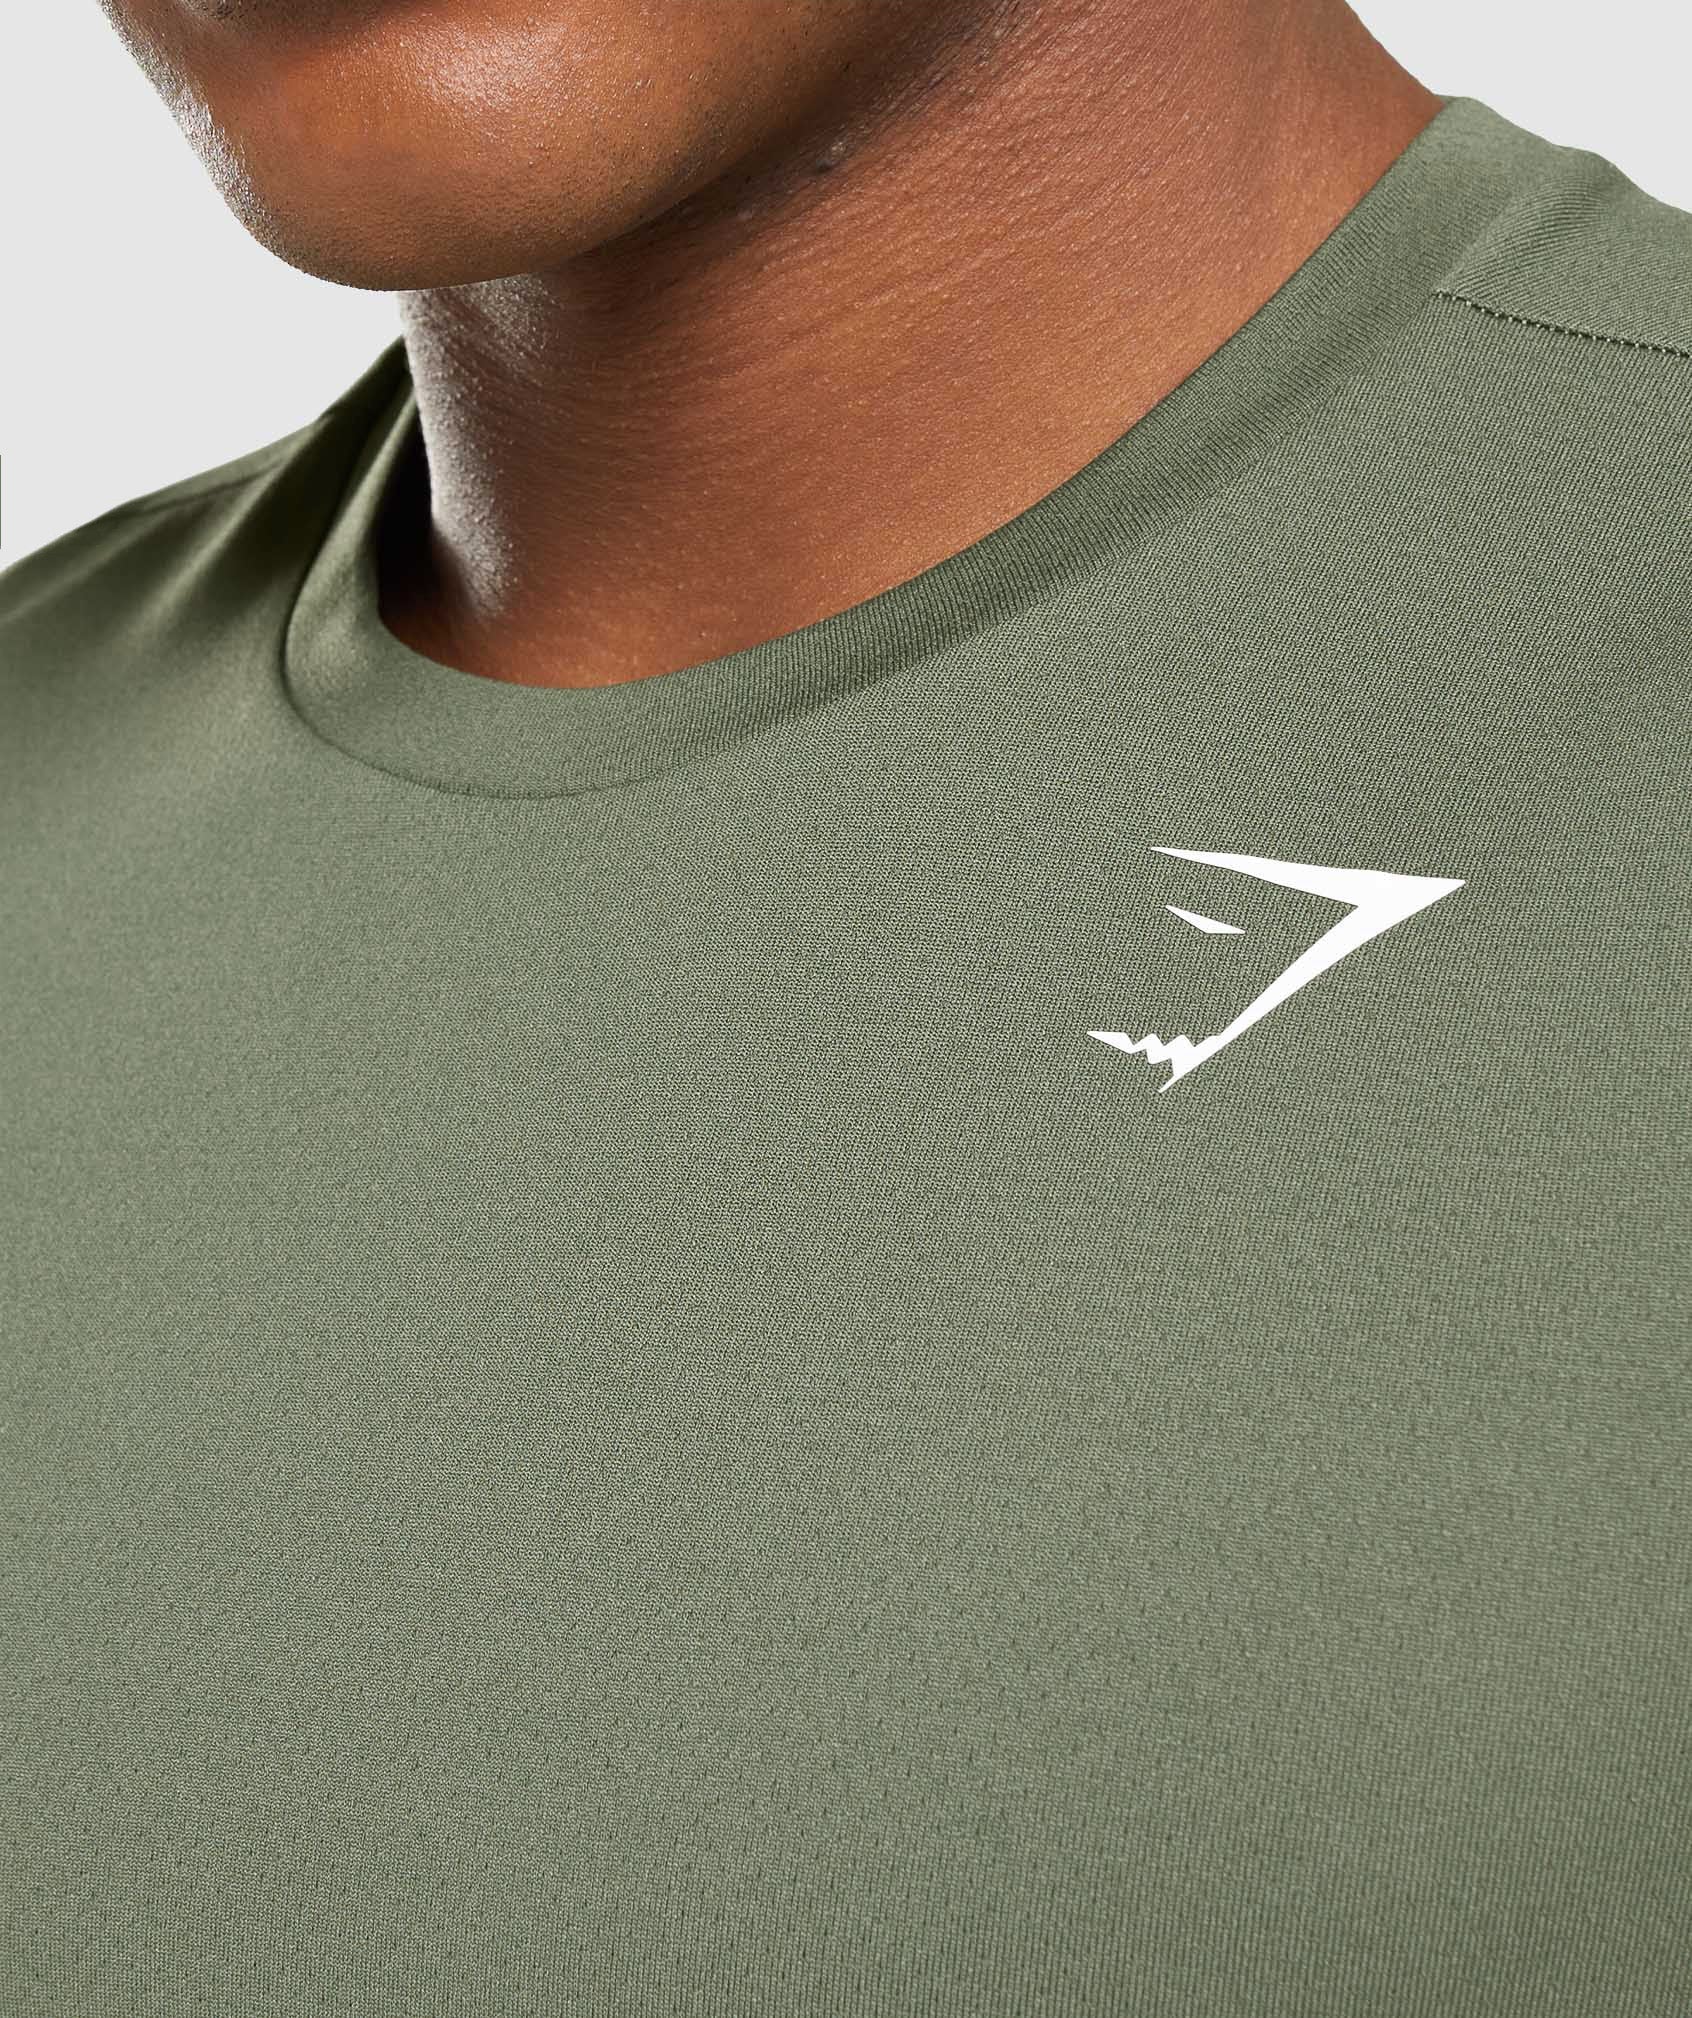 Arrival T-Shirt in Core Olive - view 5